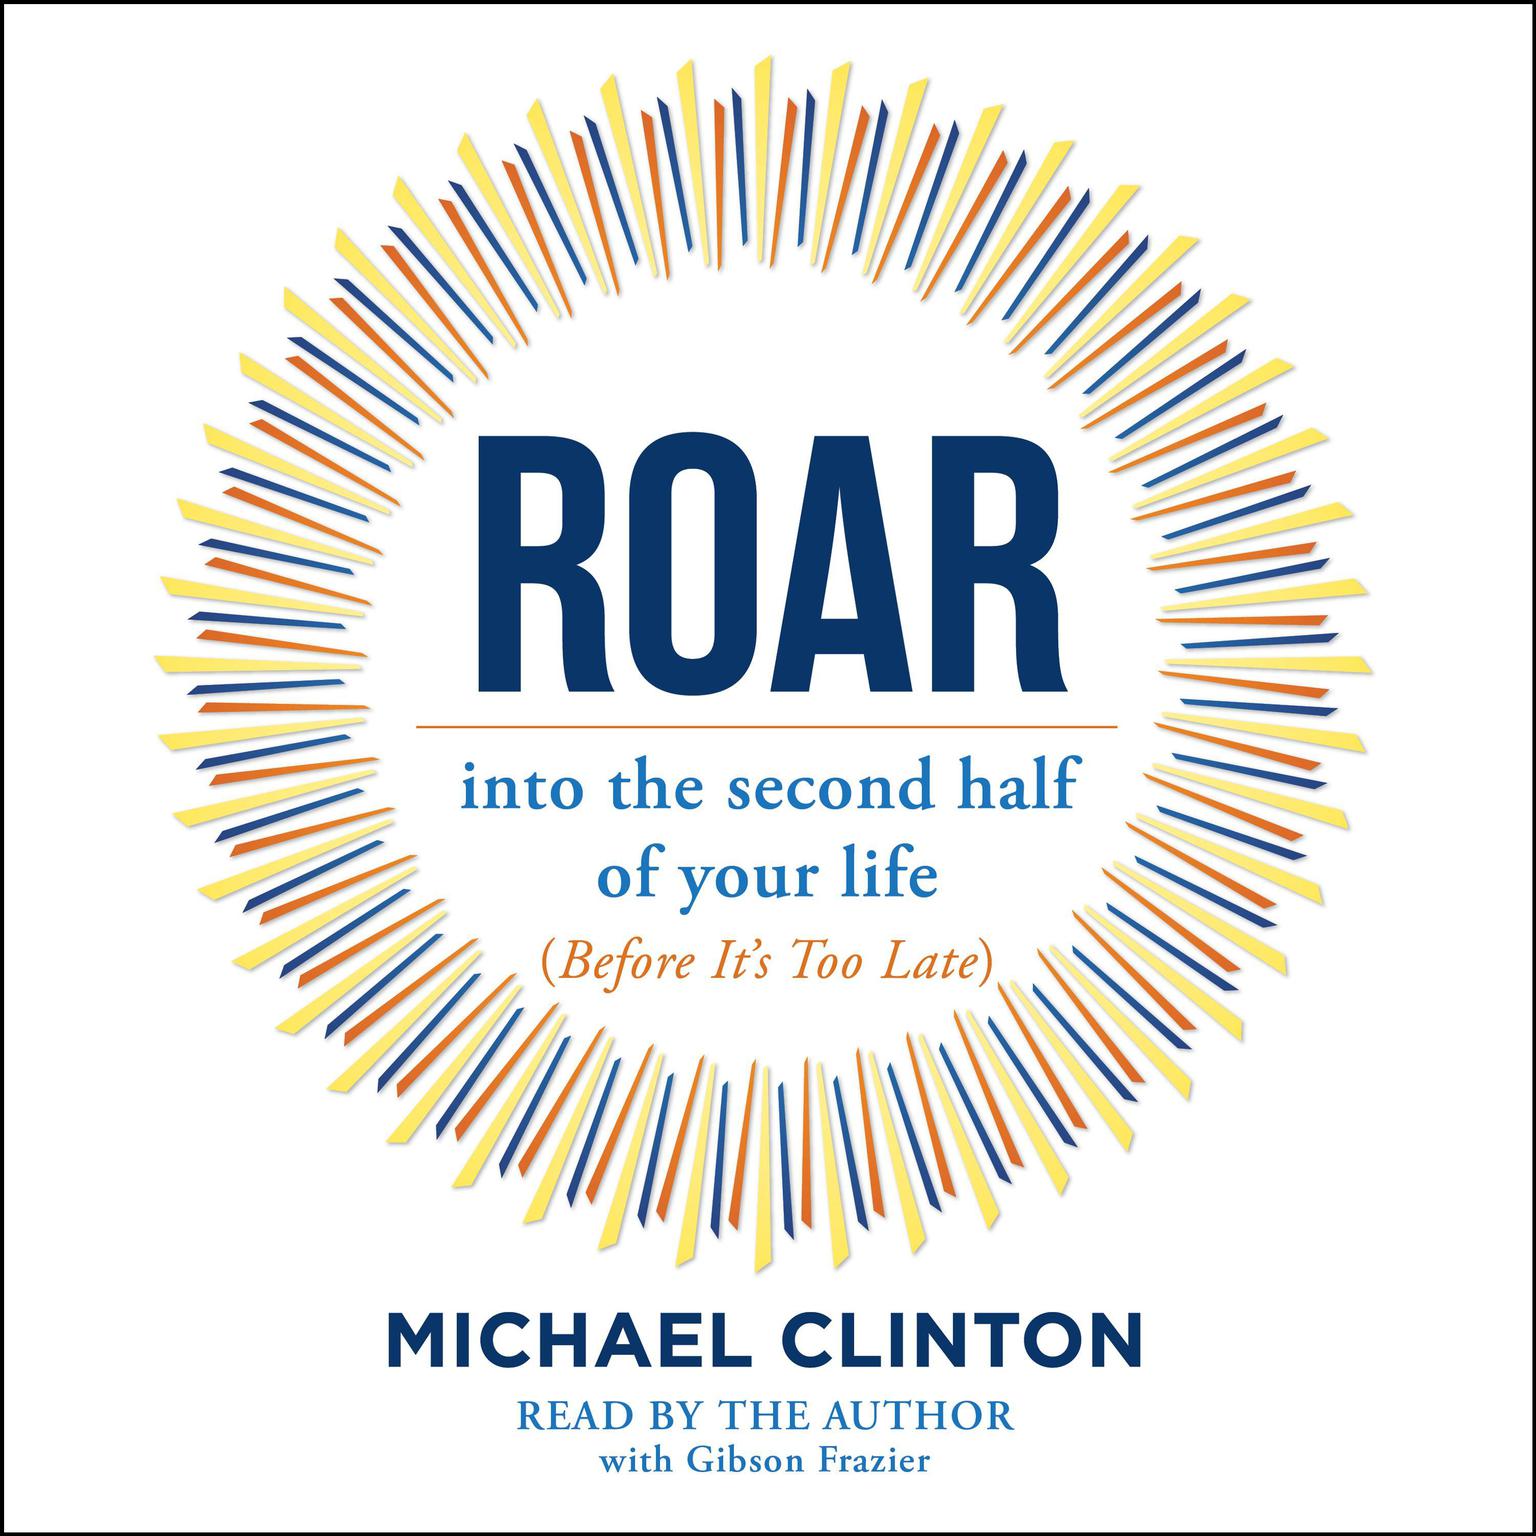 Roar: into the second half of your life (before its too late) Audiobook, by Michael Clinton